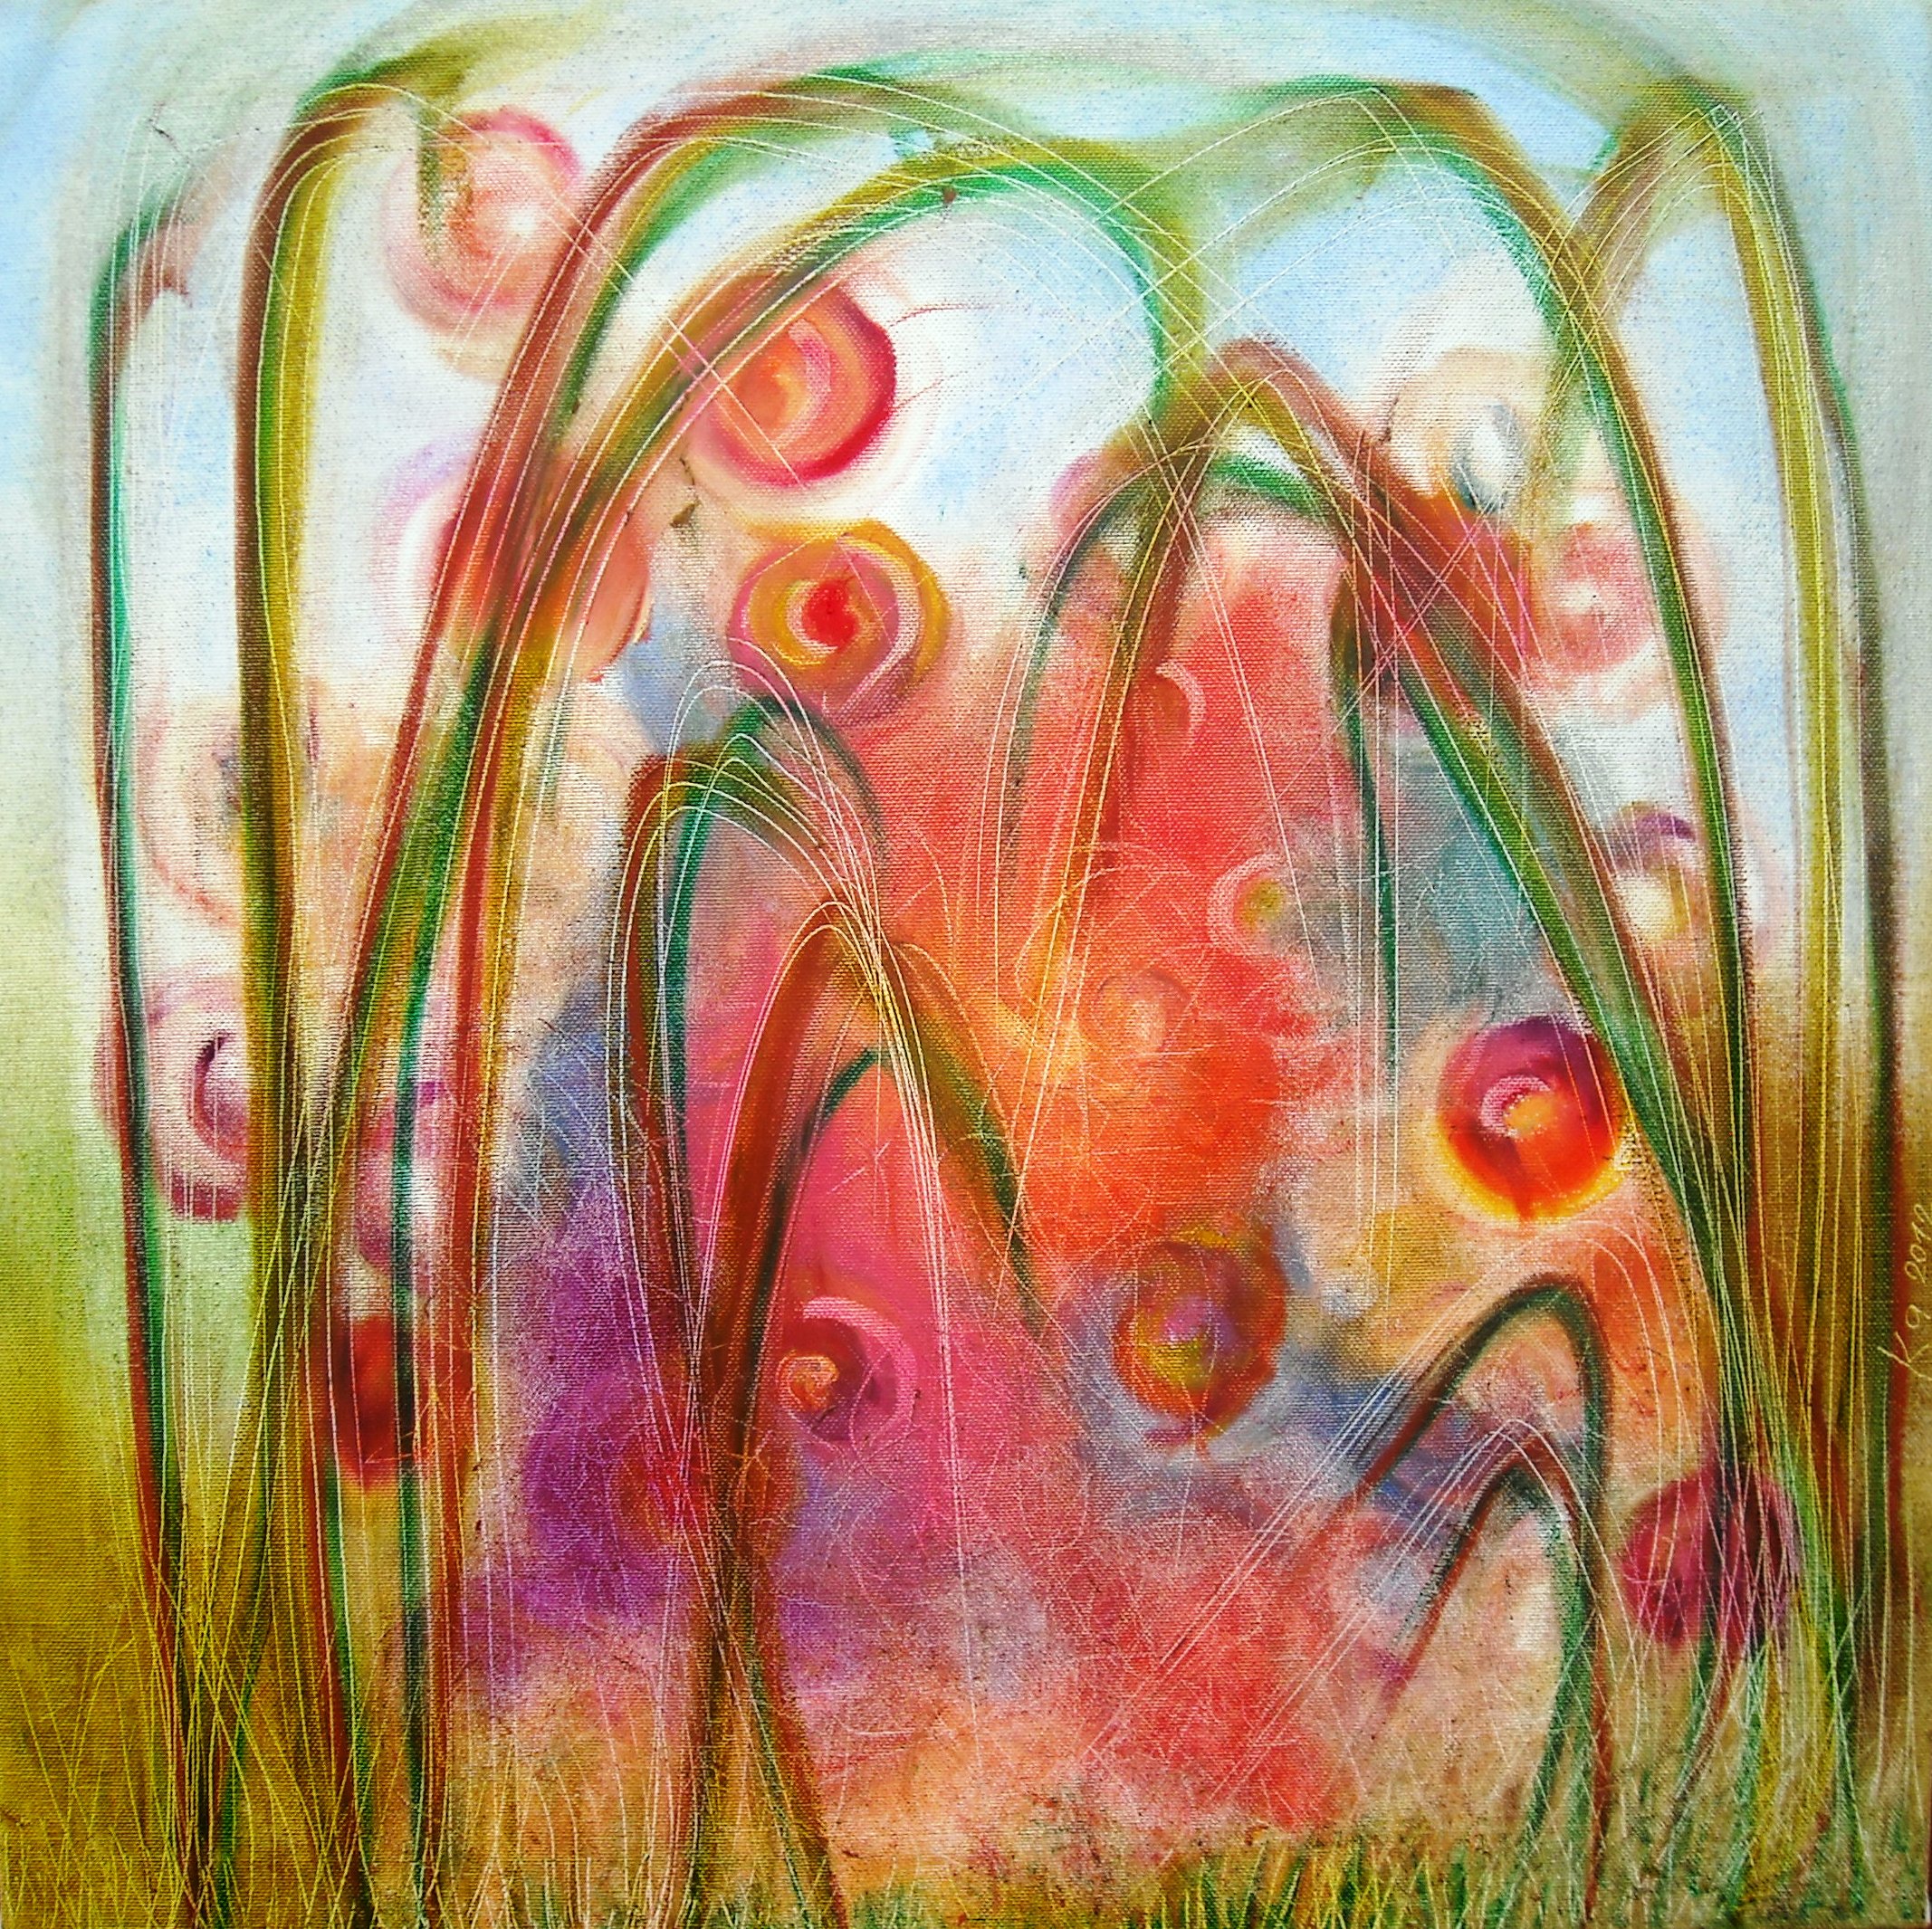 YOU NEVER KNOW...oil pastels on canvas 2012, 50 x 50 cm